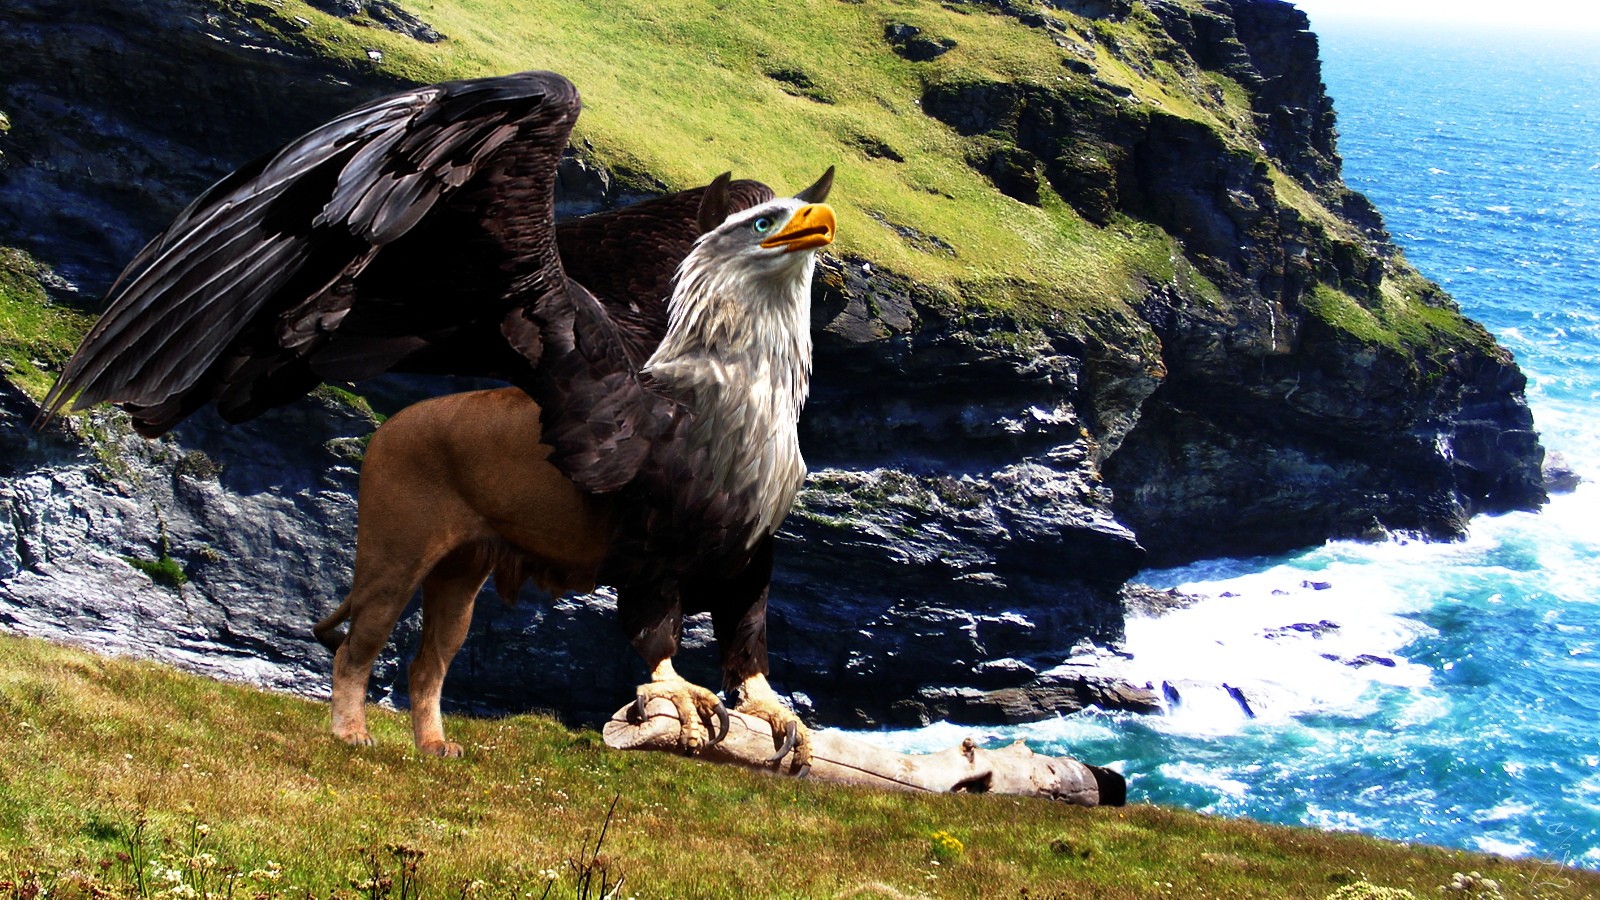 Griffin 4K wallpapers for your desktop or mobile screen free and easy to  download